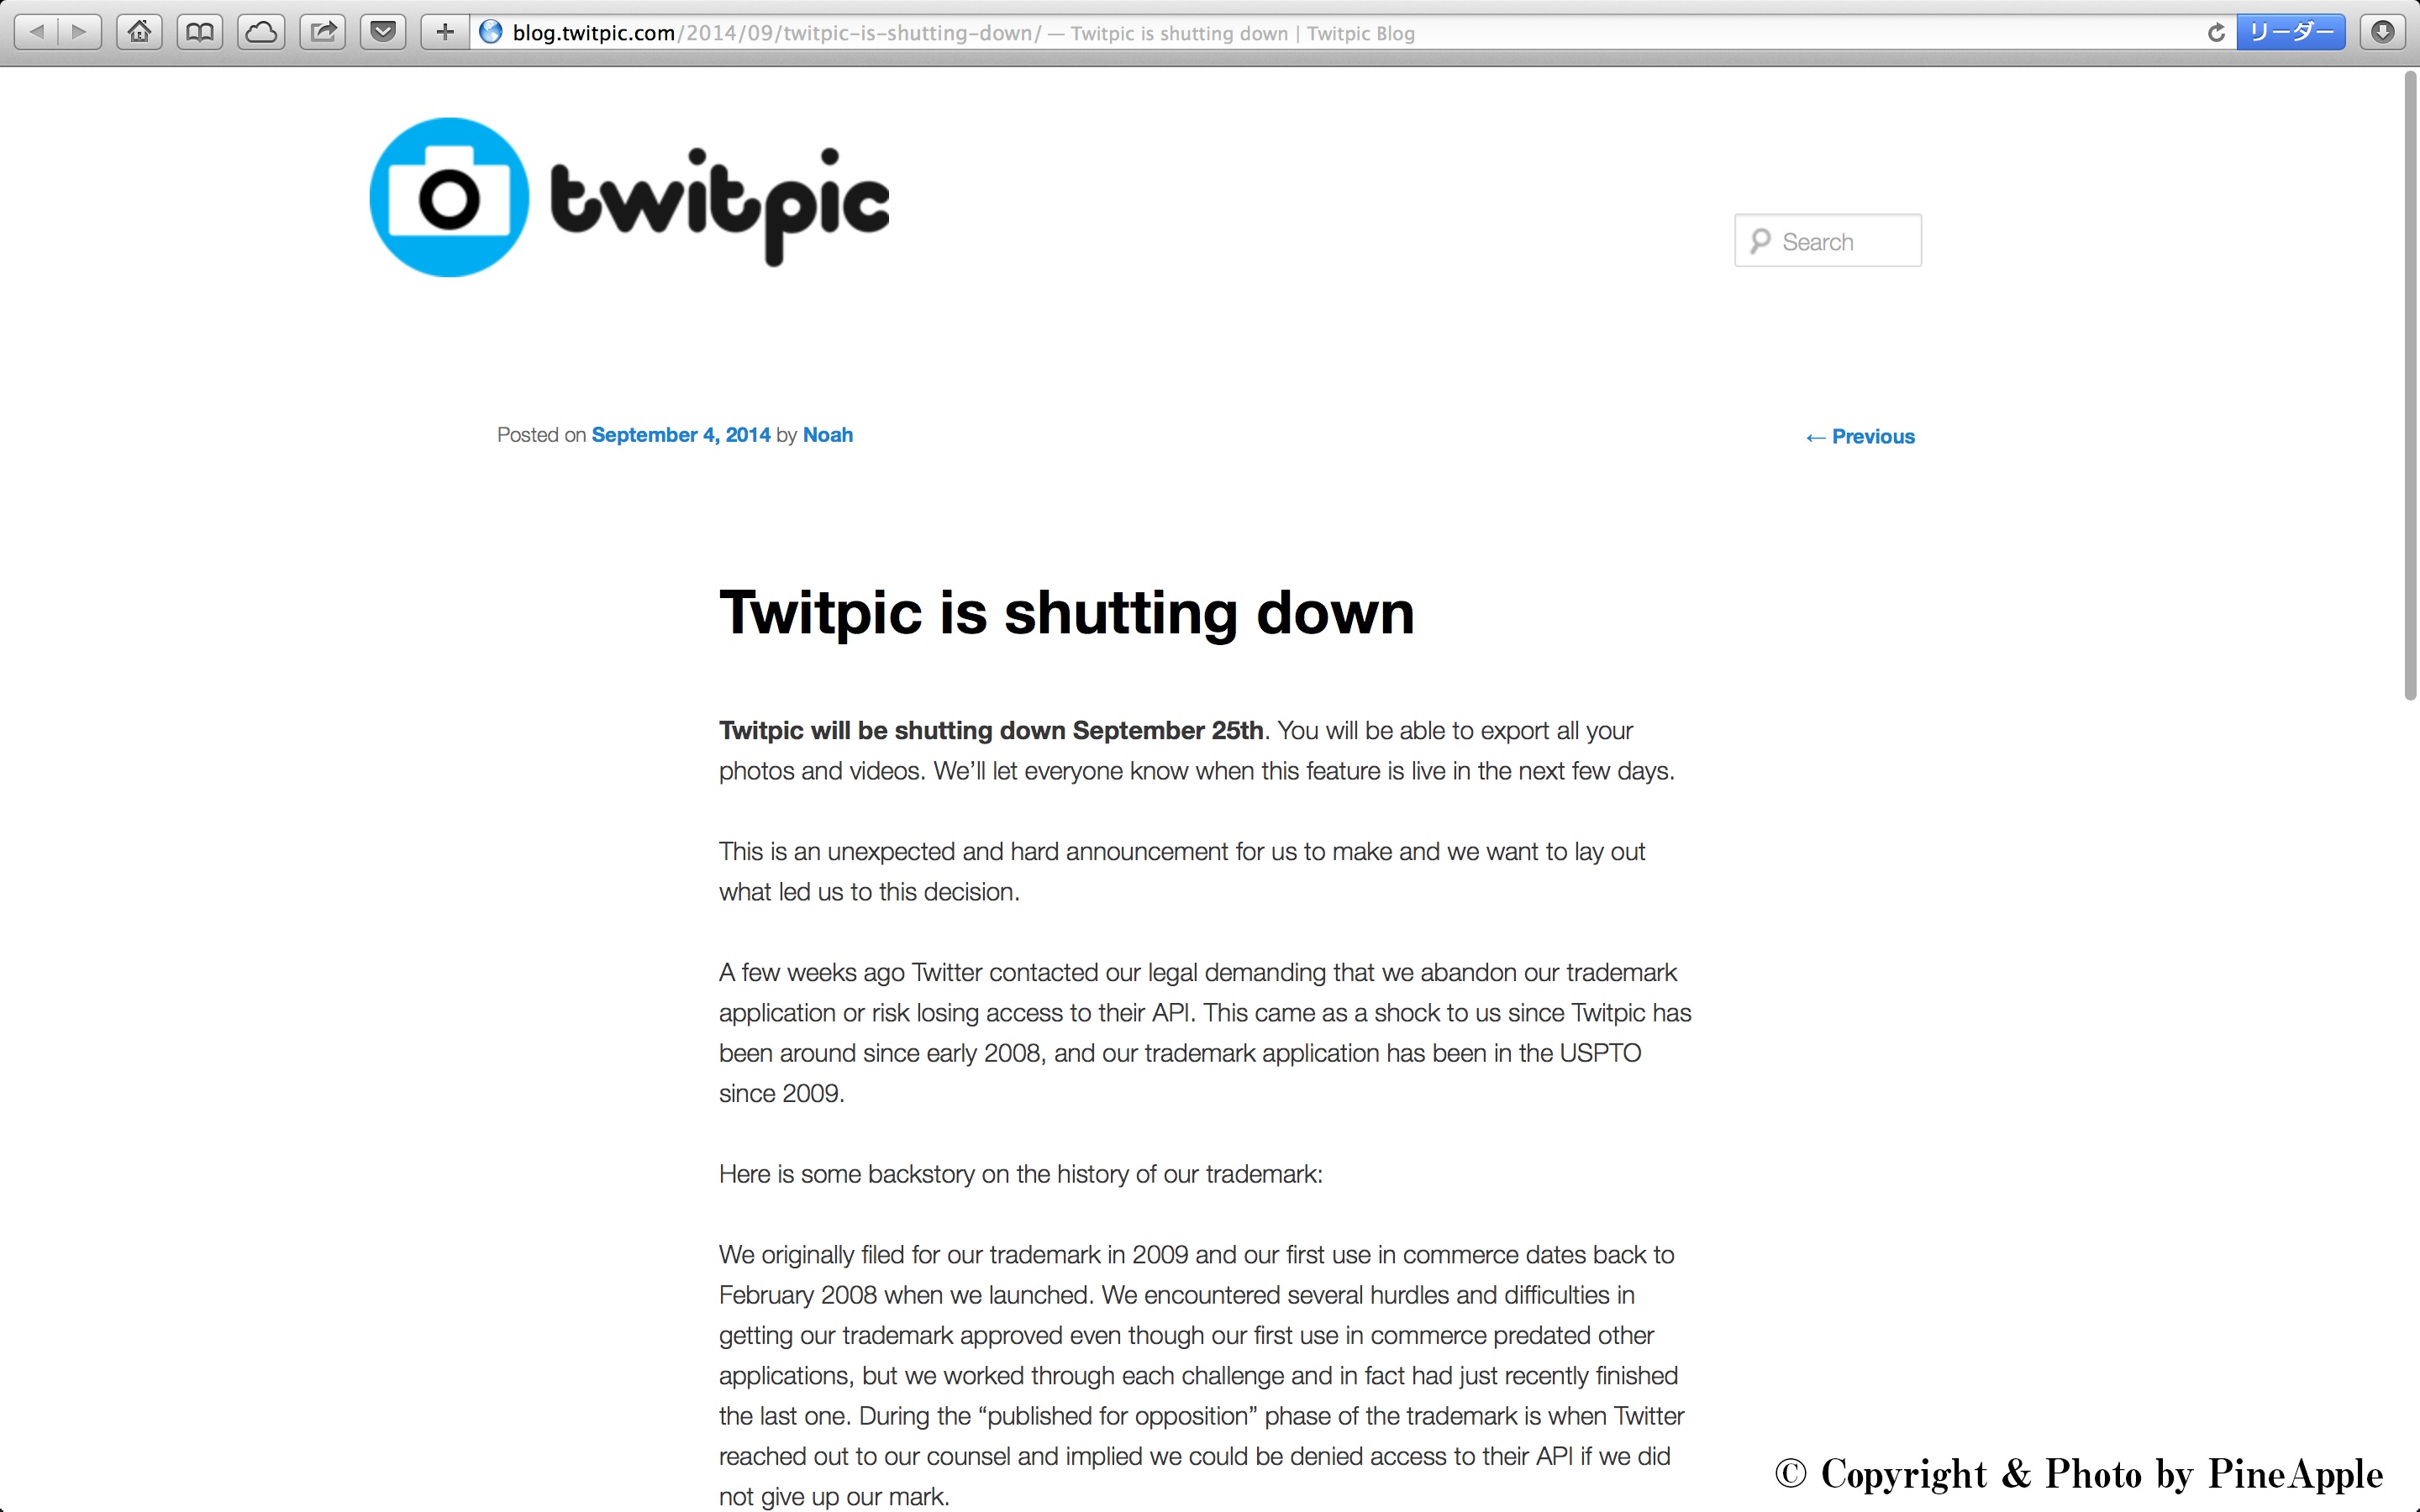 Twitpic is shutting down